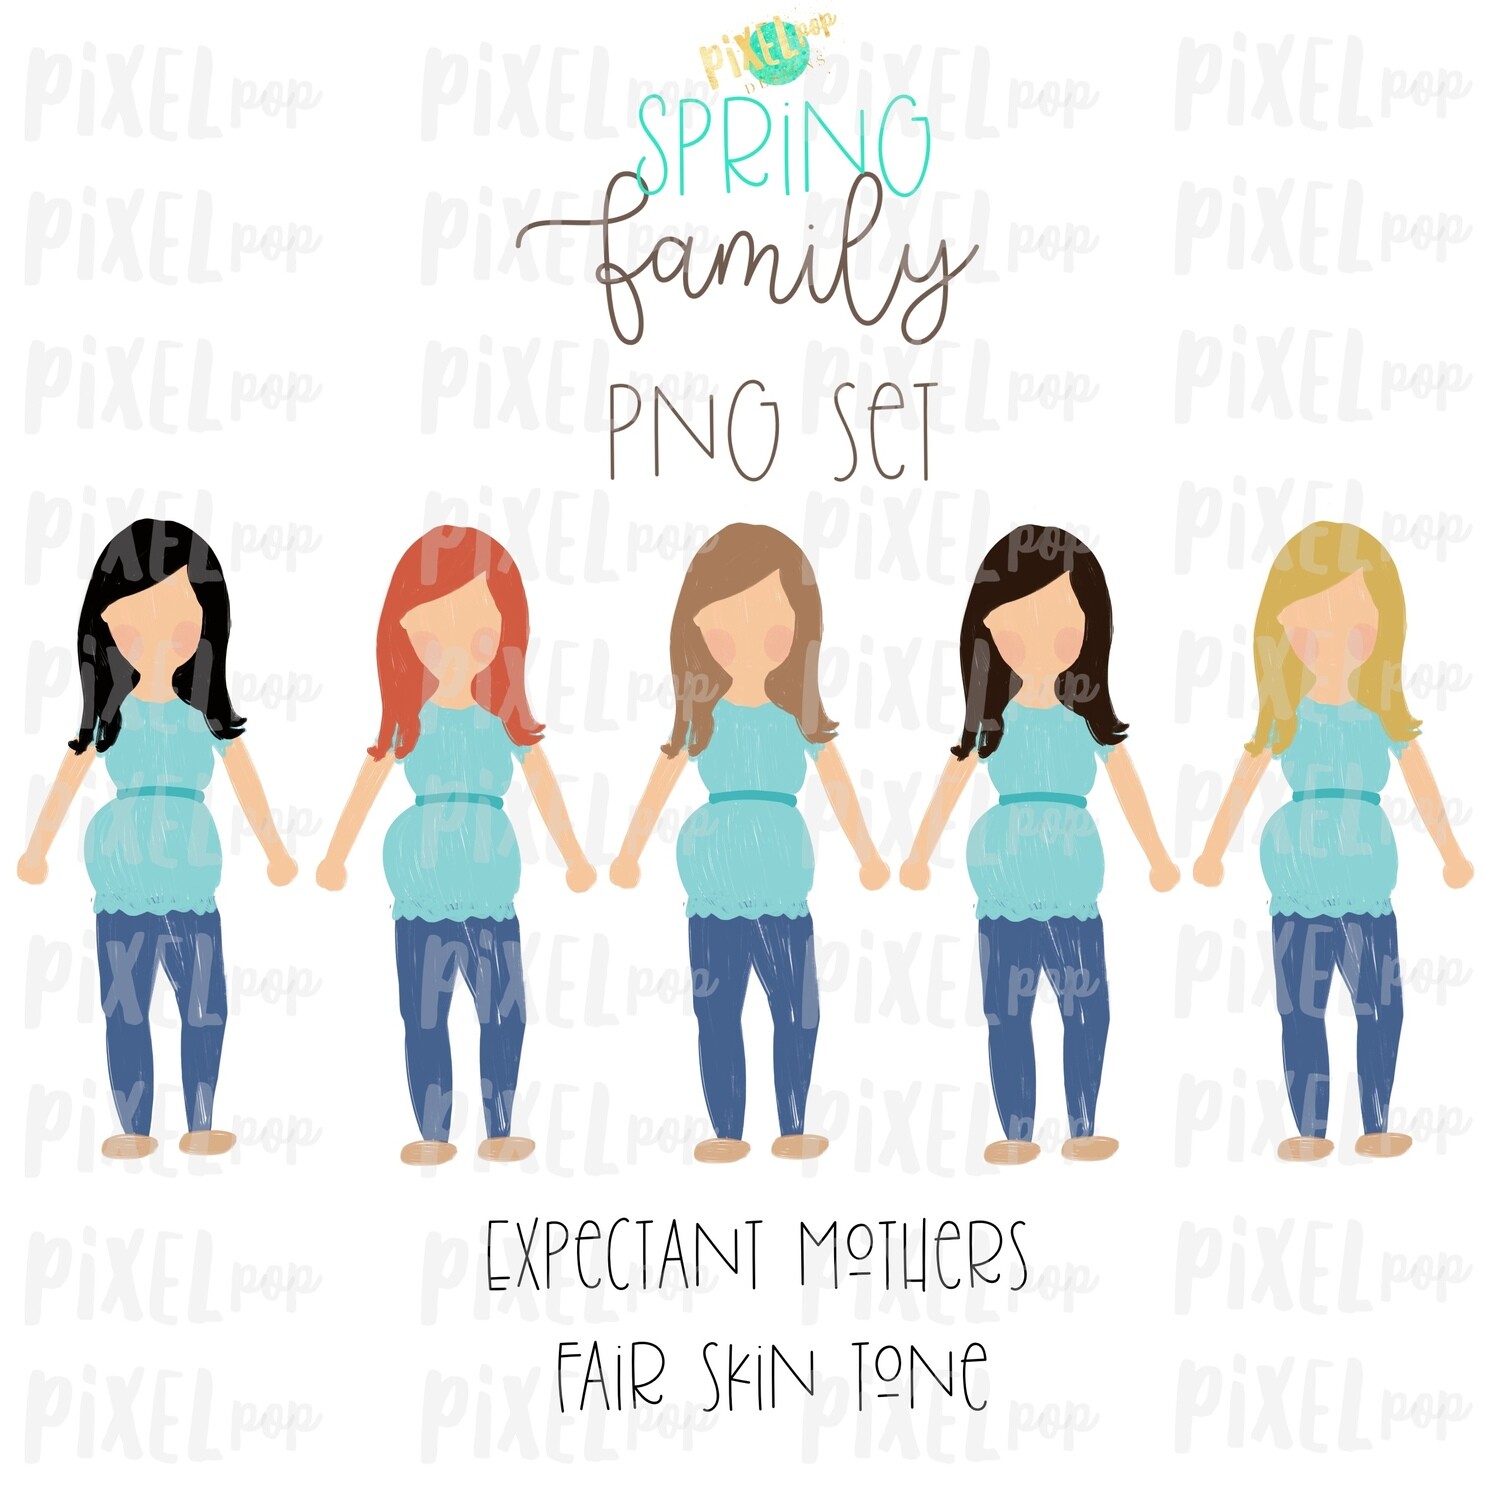 Expectant Pregnant Mothers SPRING Fair Skin Tone Stick People Figure Members PNG | Family Ornament | Family Portrait Images | Digital Art